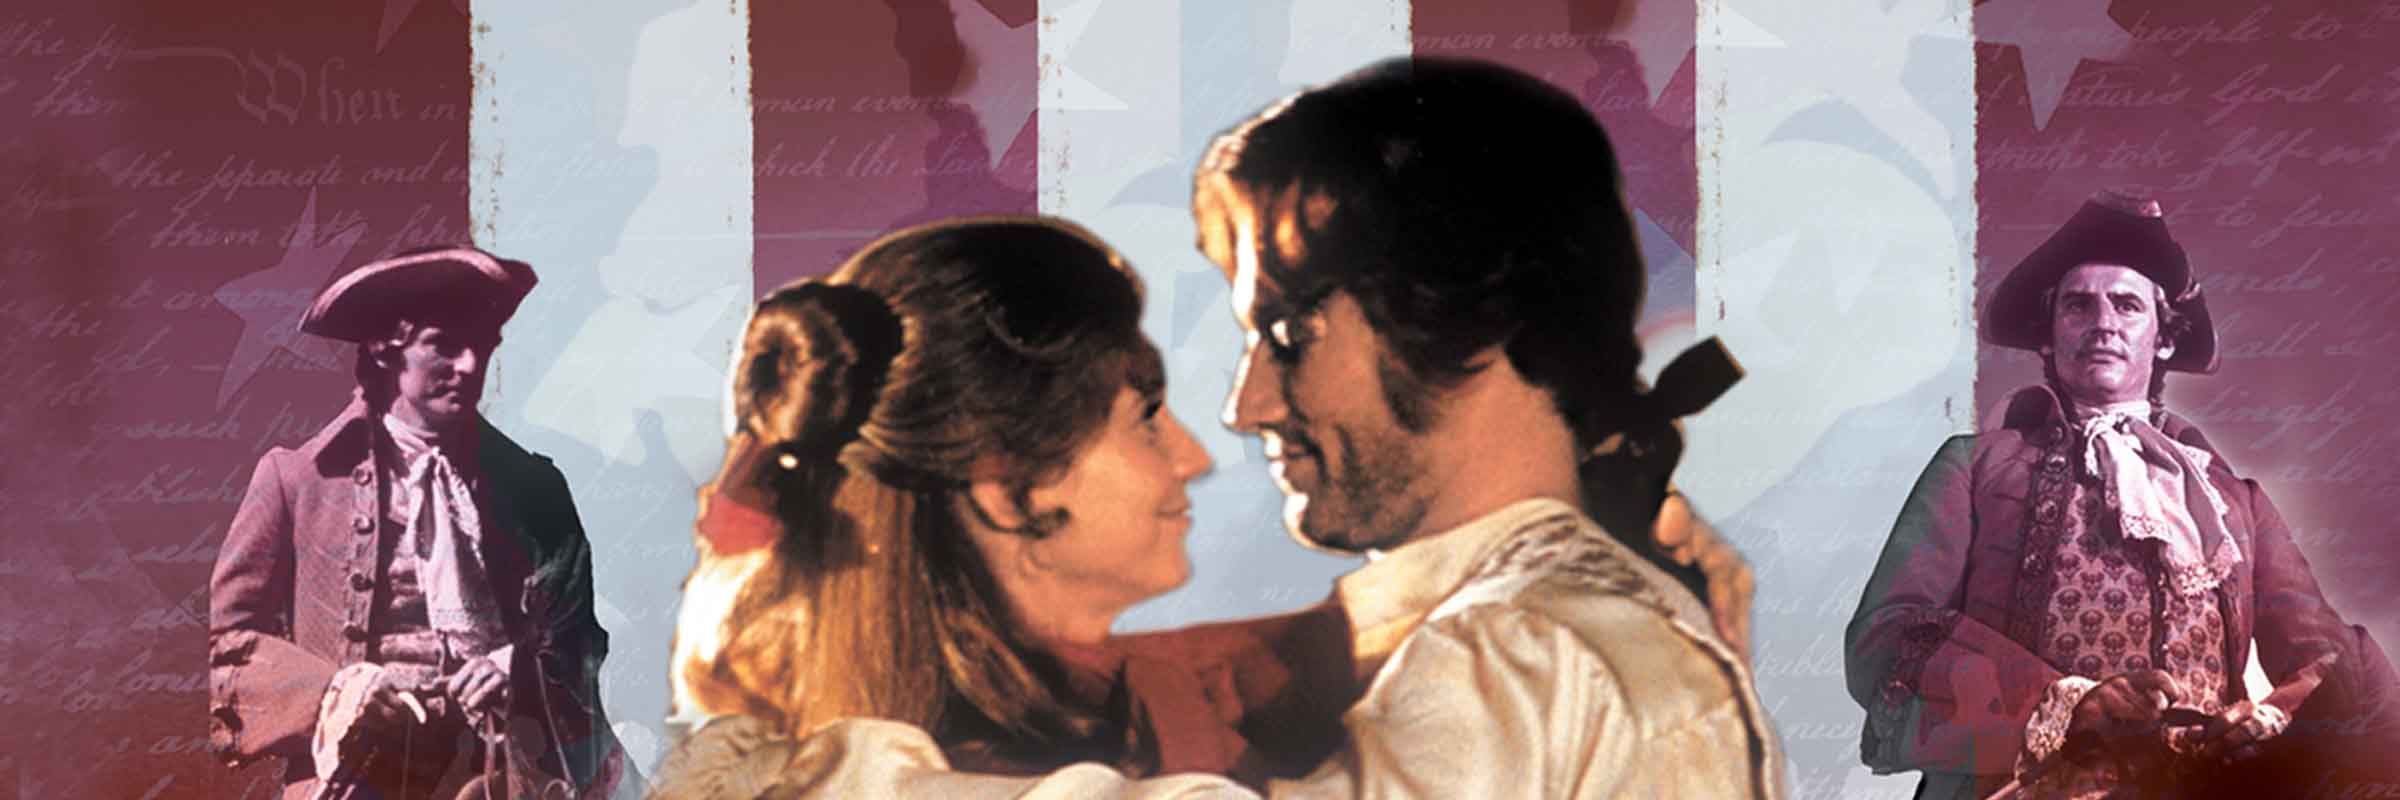 1776 movie review